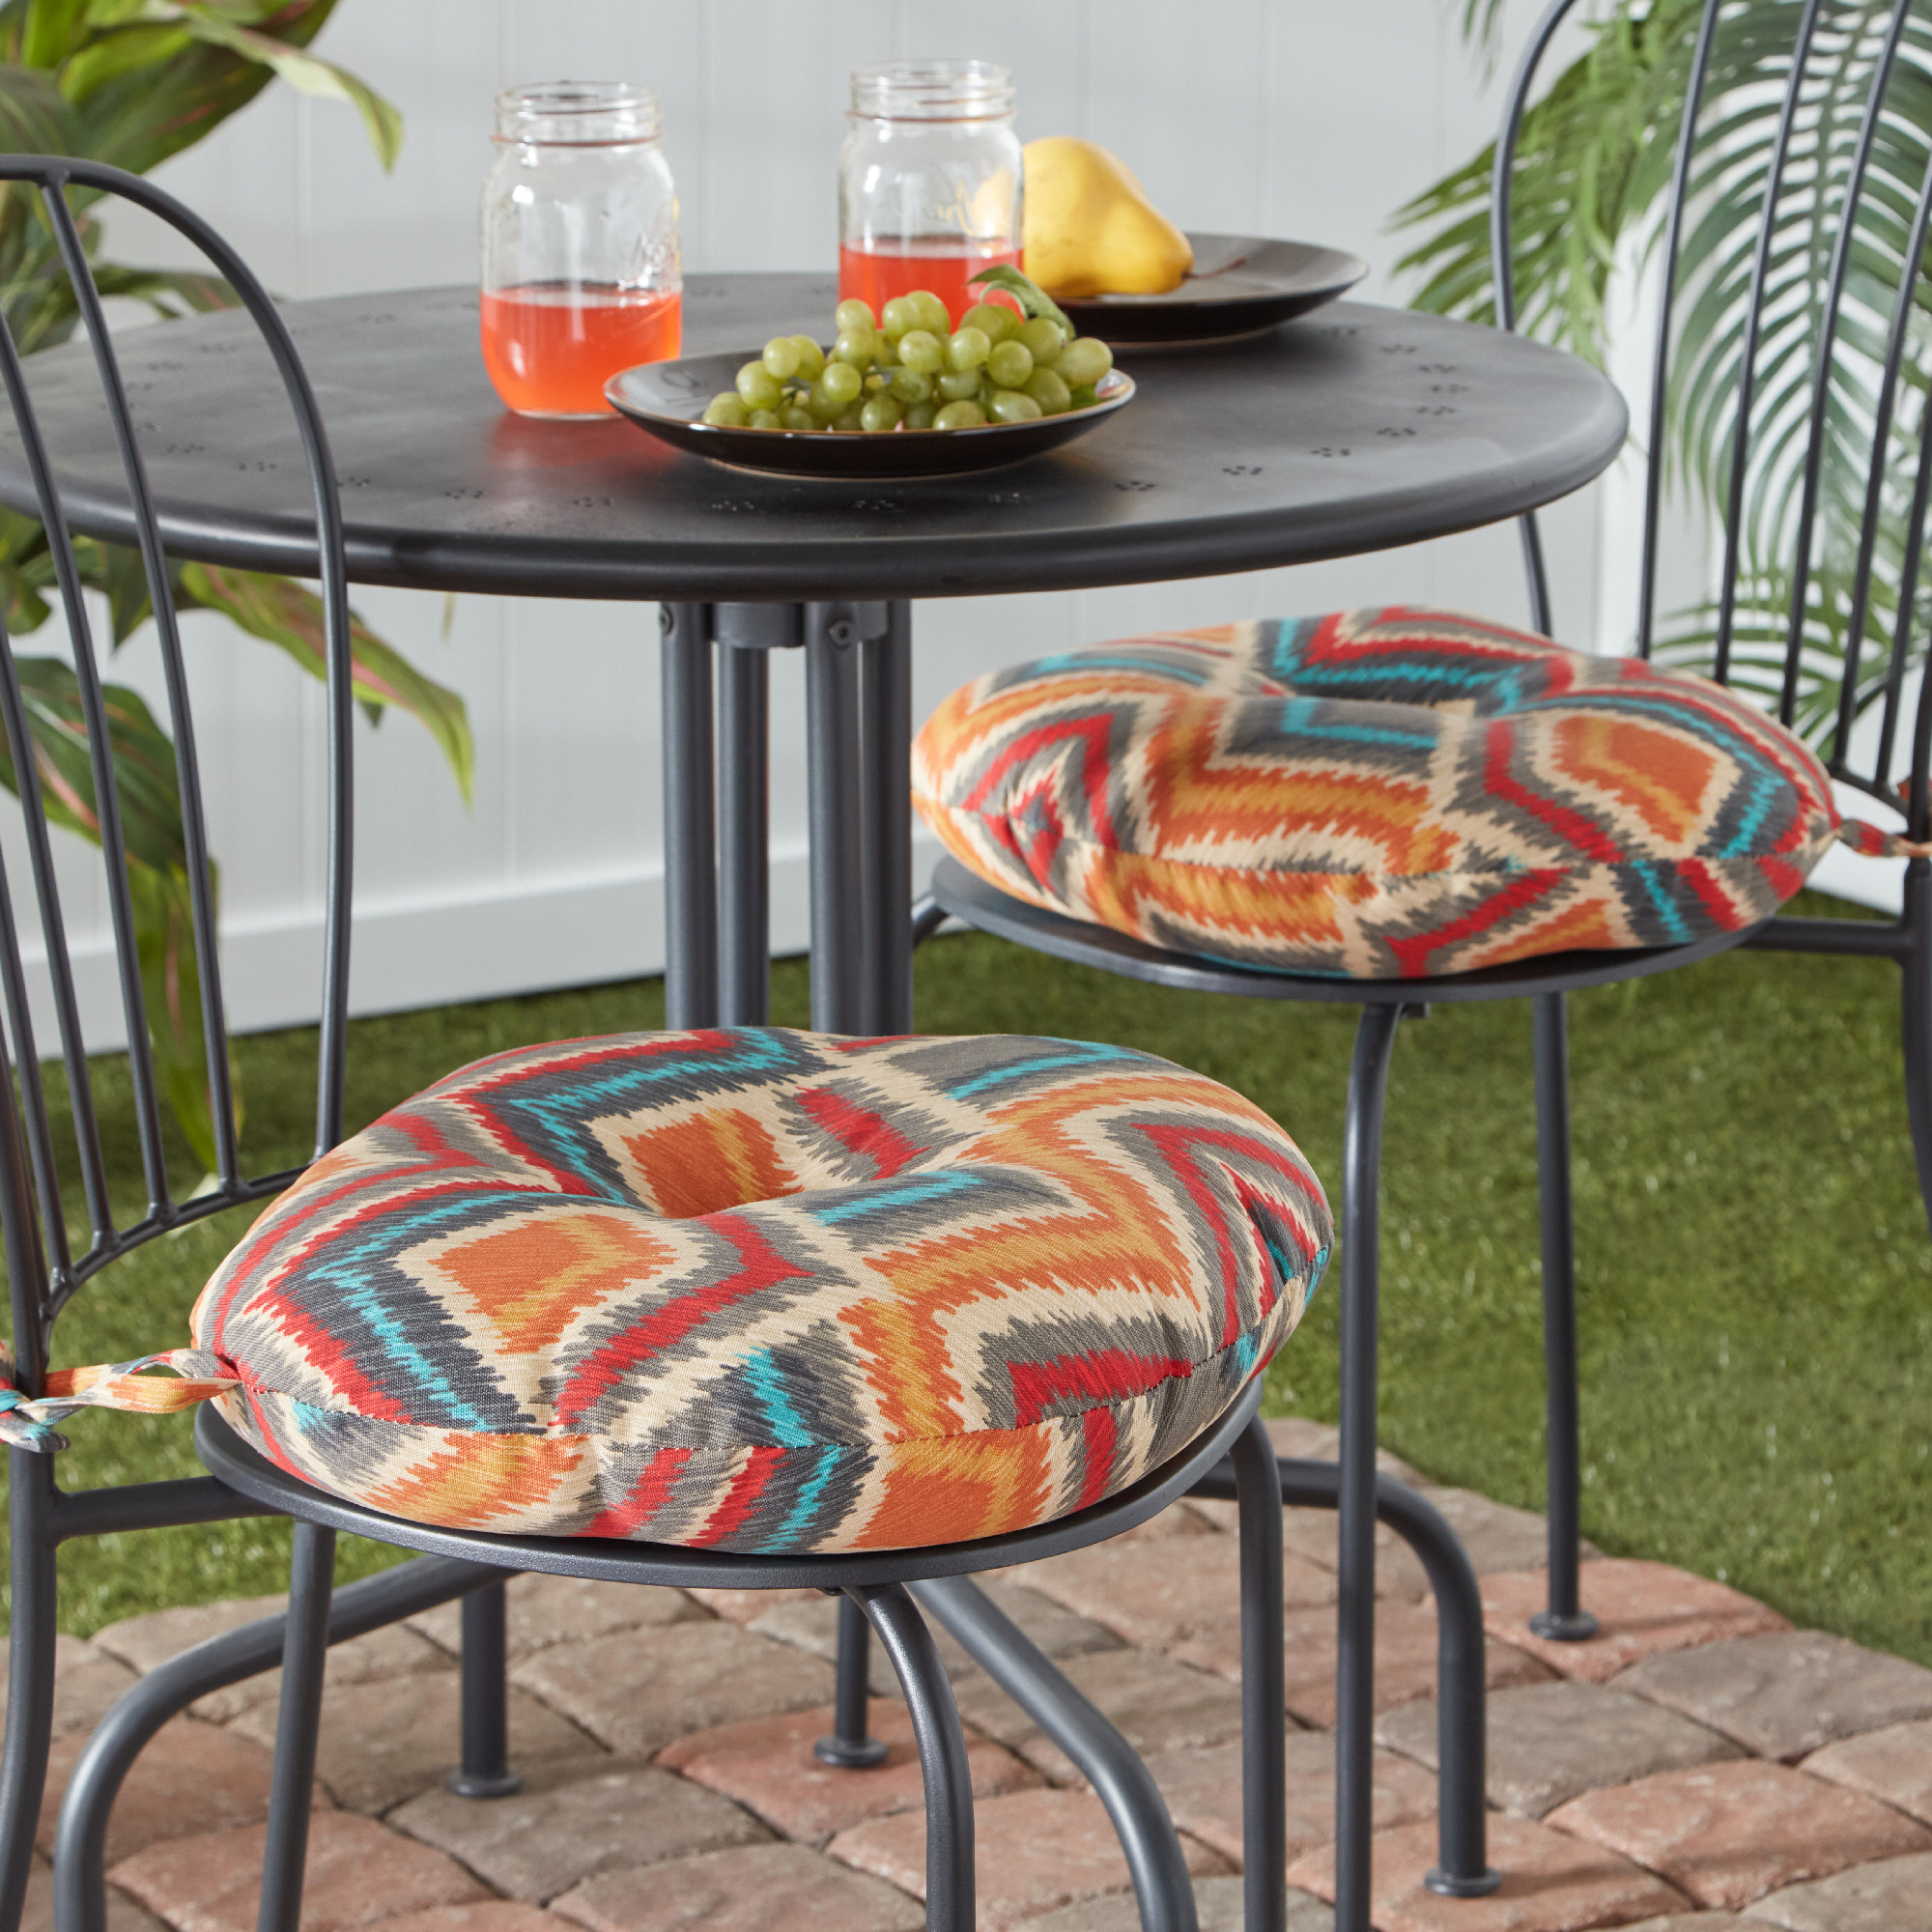 Greendale Home Fashions Surreal Chevron 15 in. Round Outdoor Reversible Bistro Seat Cushion (Set of 2) - image 3 of 7